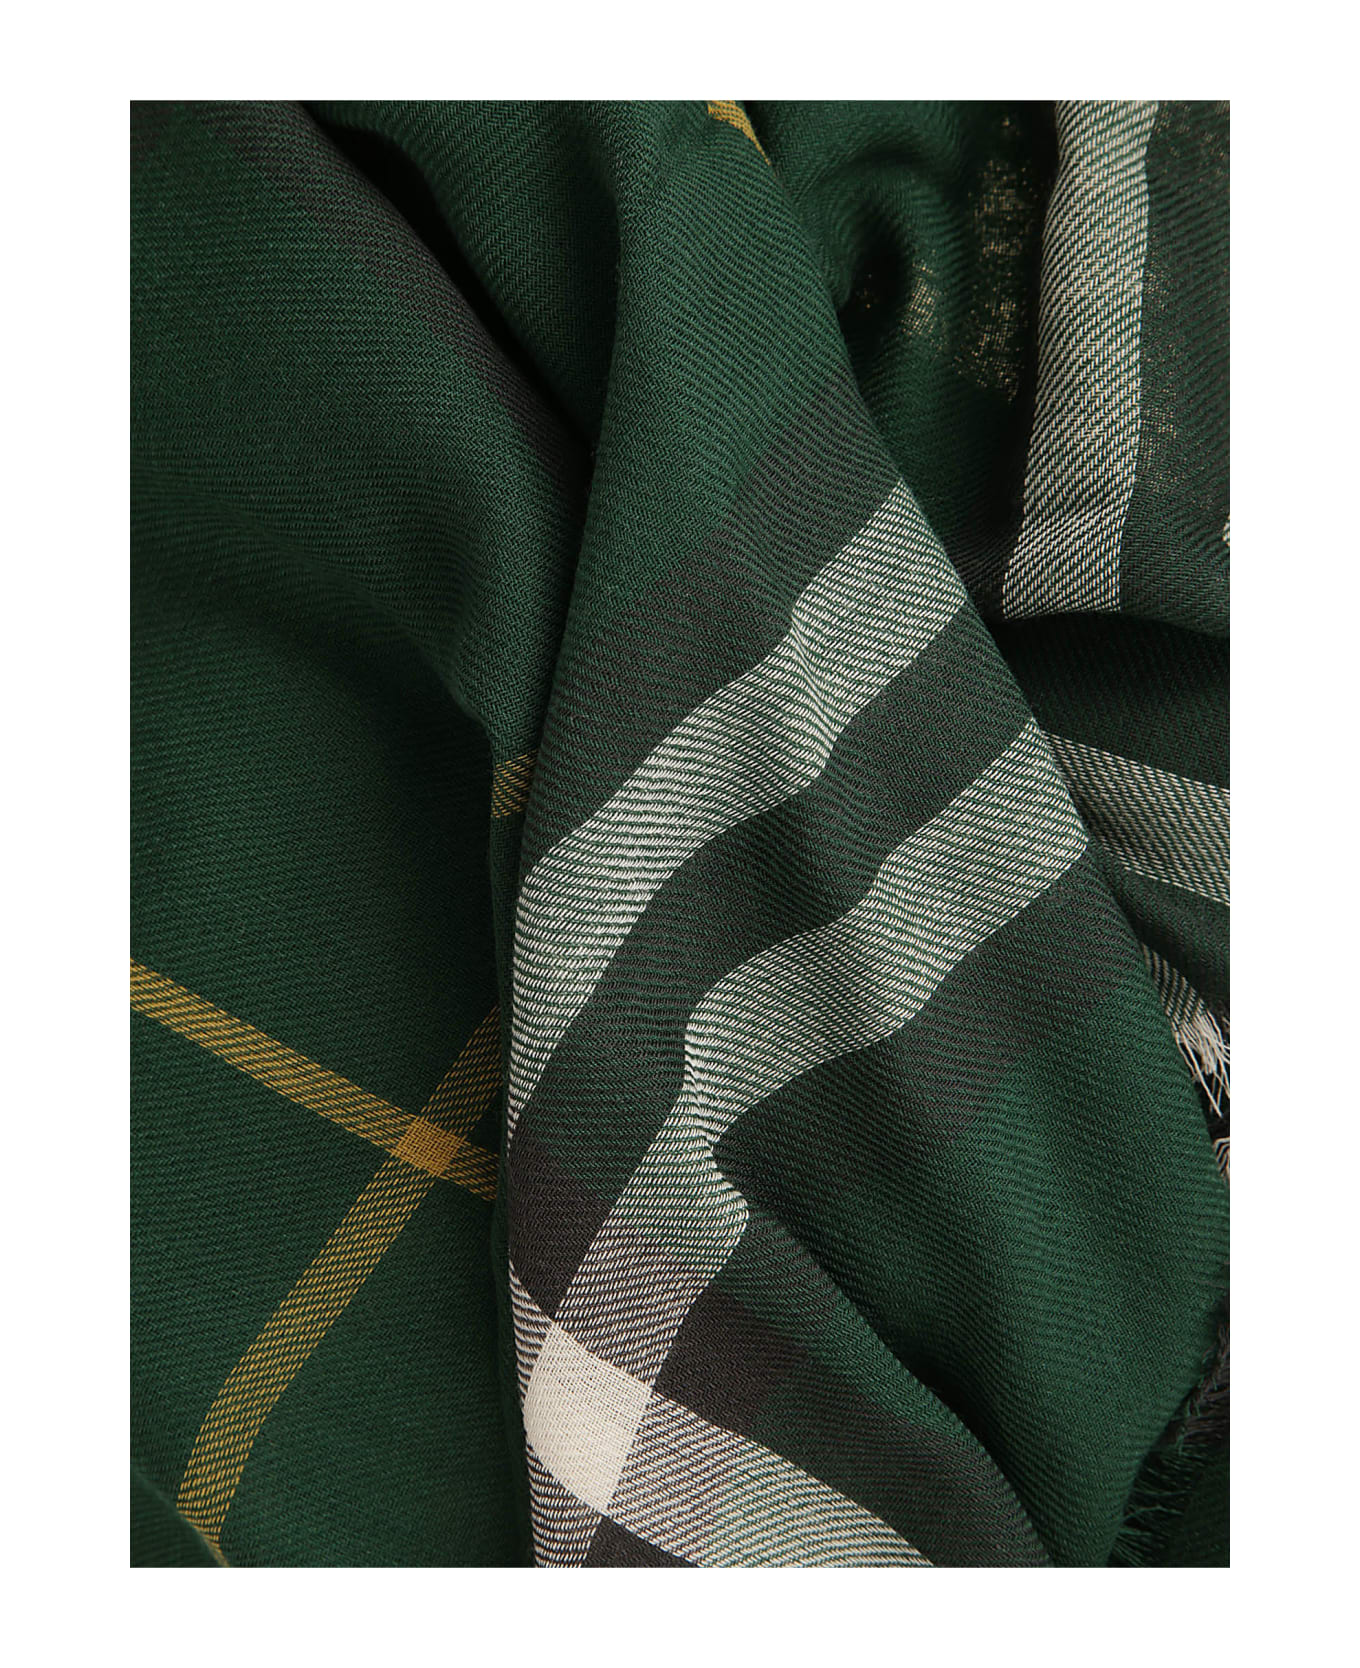 Burberry Giant Check Lightweight Scarf - Ivy スカーフ